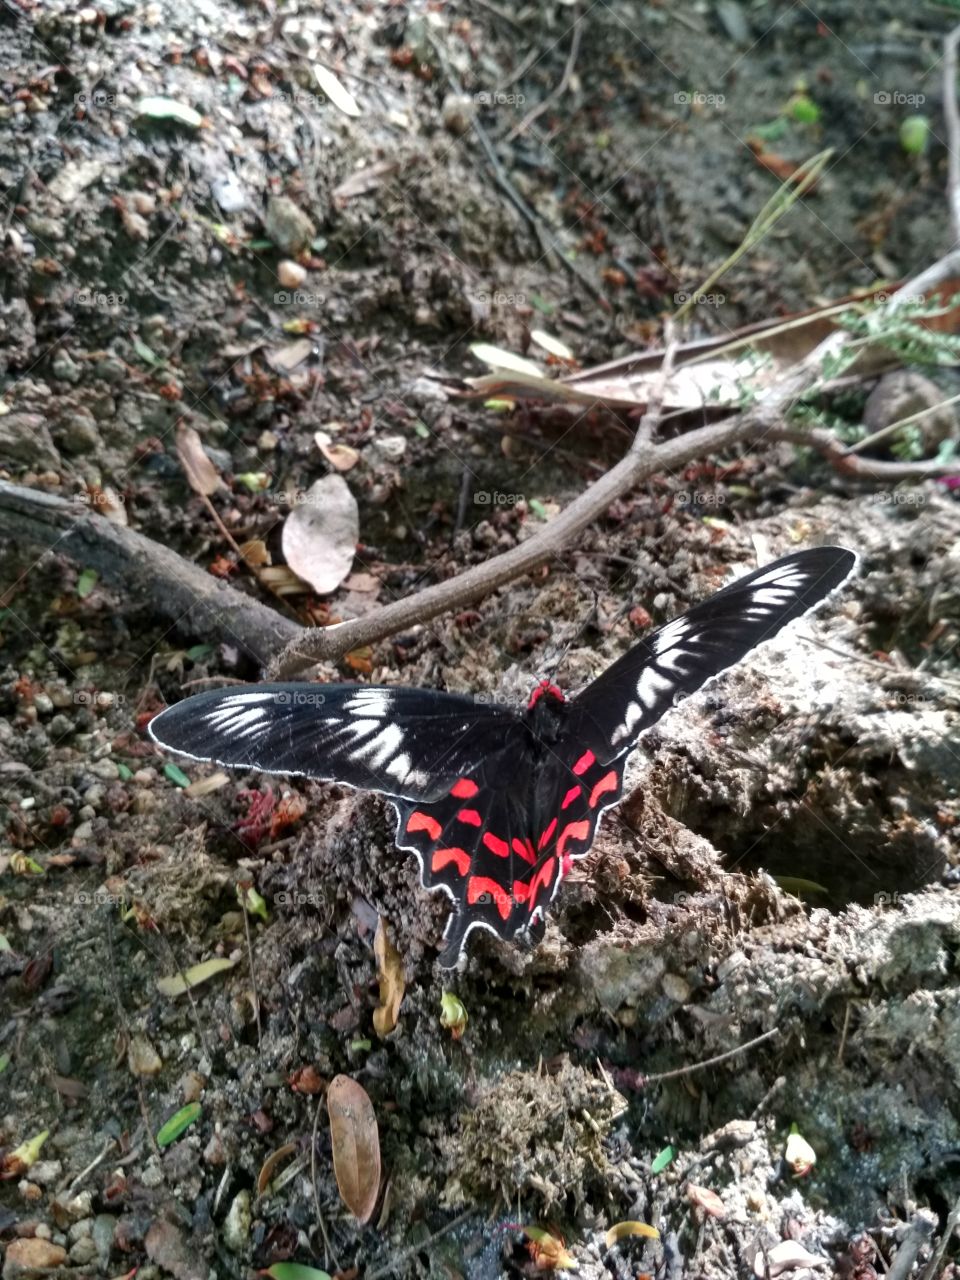 I love this butterfly